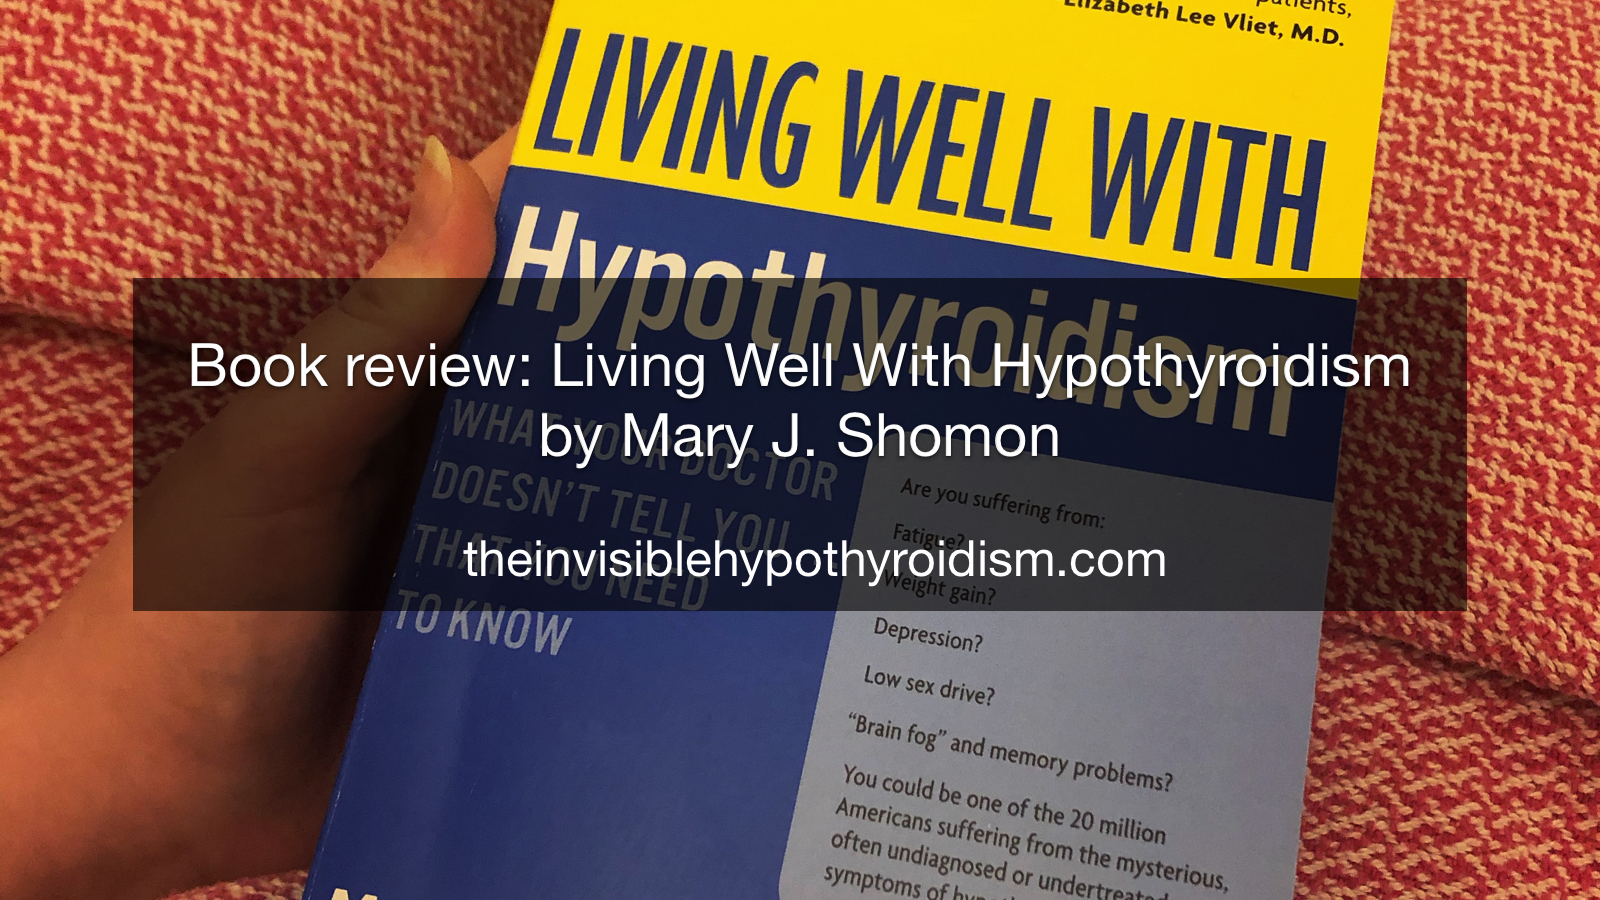 Book review: Living Well With Hypothyroidism by Mary J. Shomon